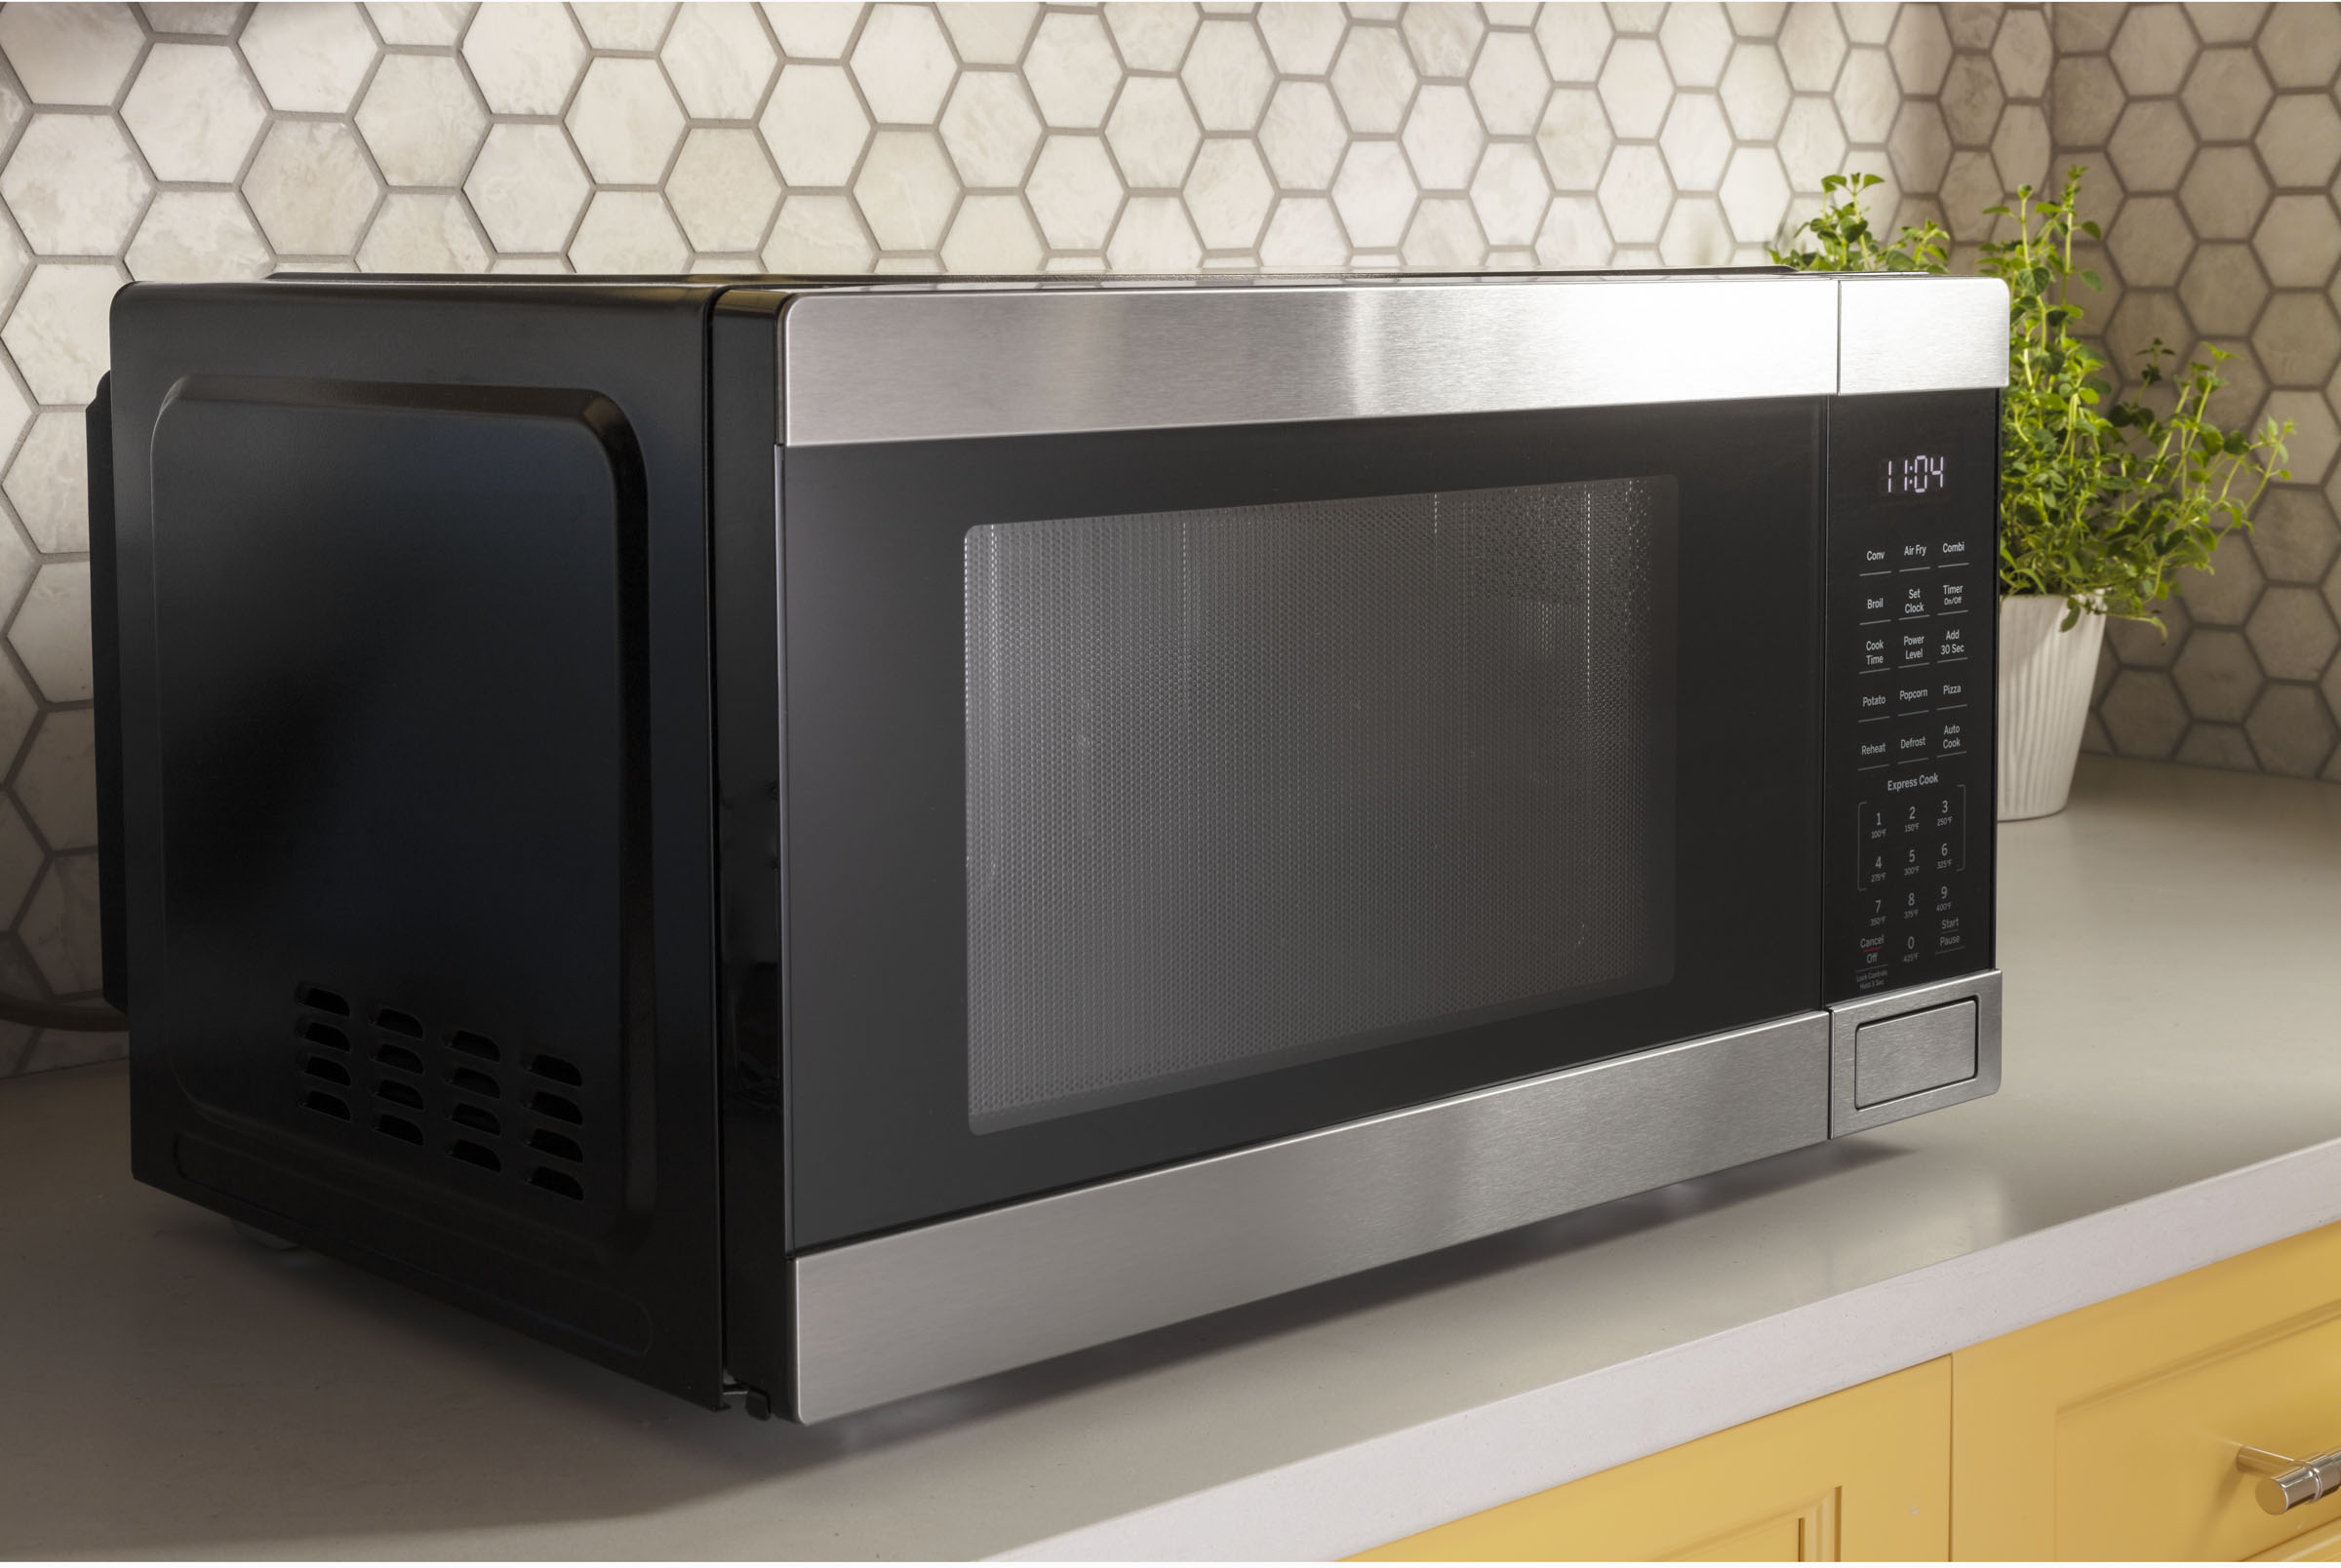 GE JES1142SJ 1.1 cu. ft. Countertop Microwave Oven with 1,100 Cooking Watts  & Child Lockout